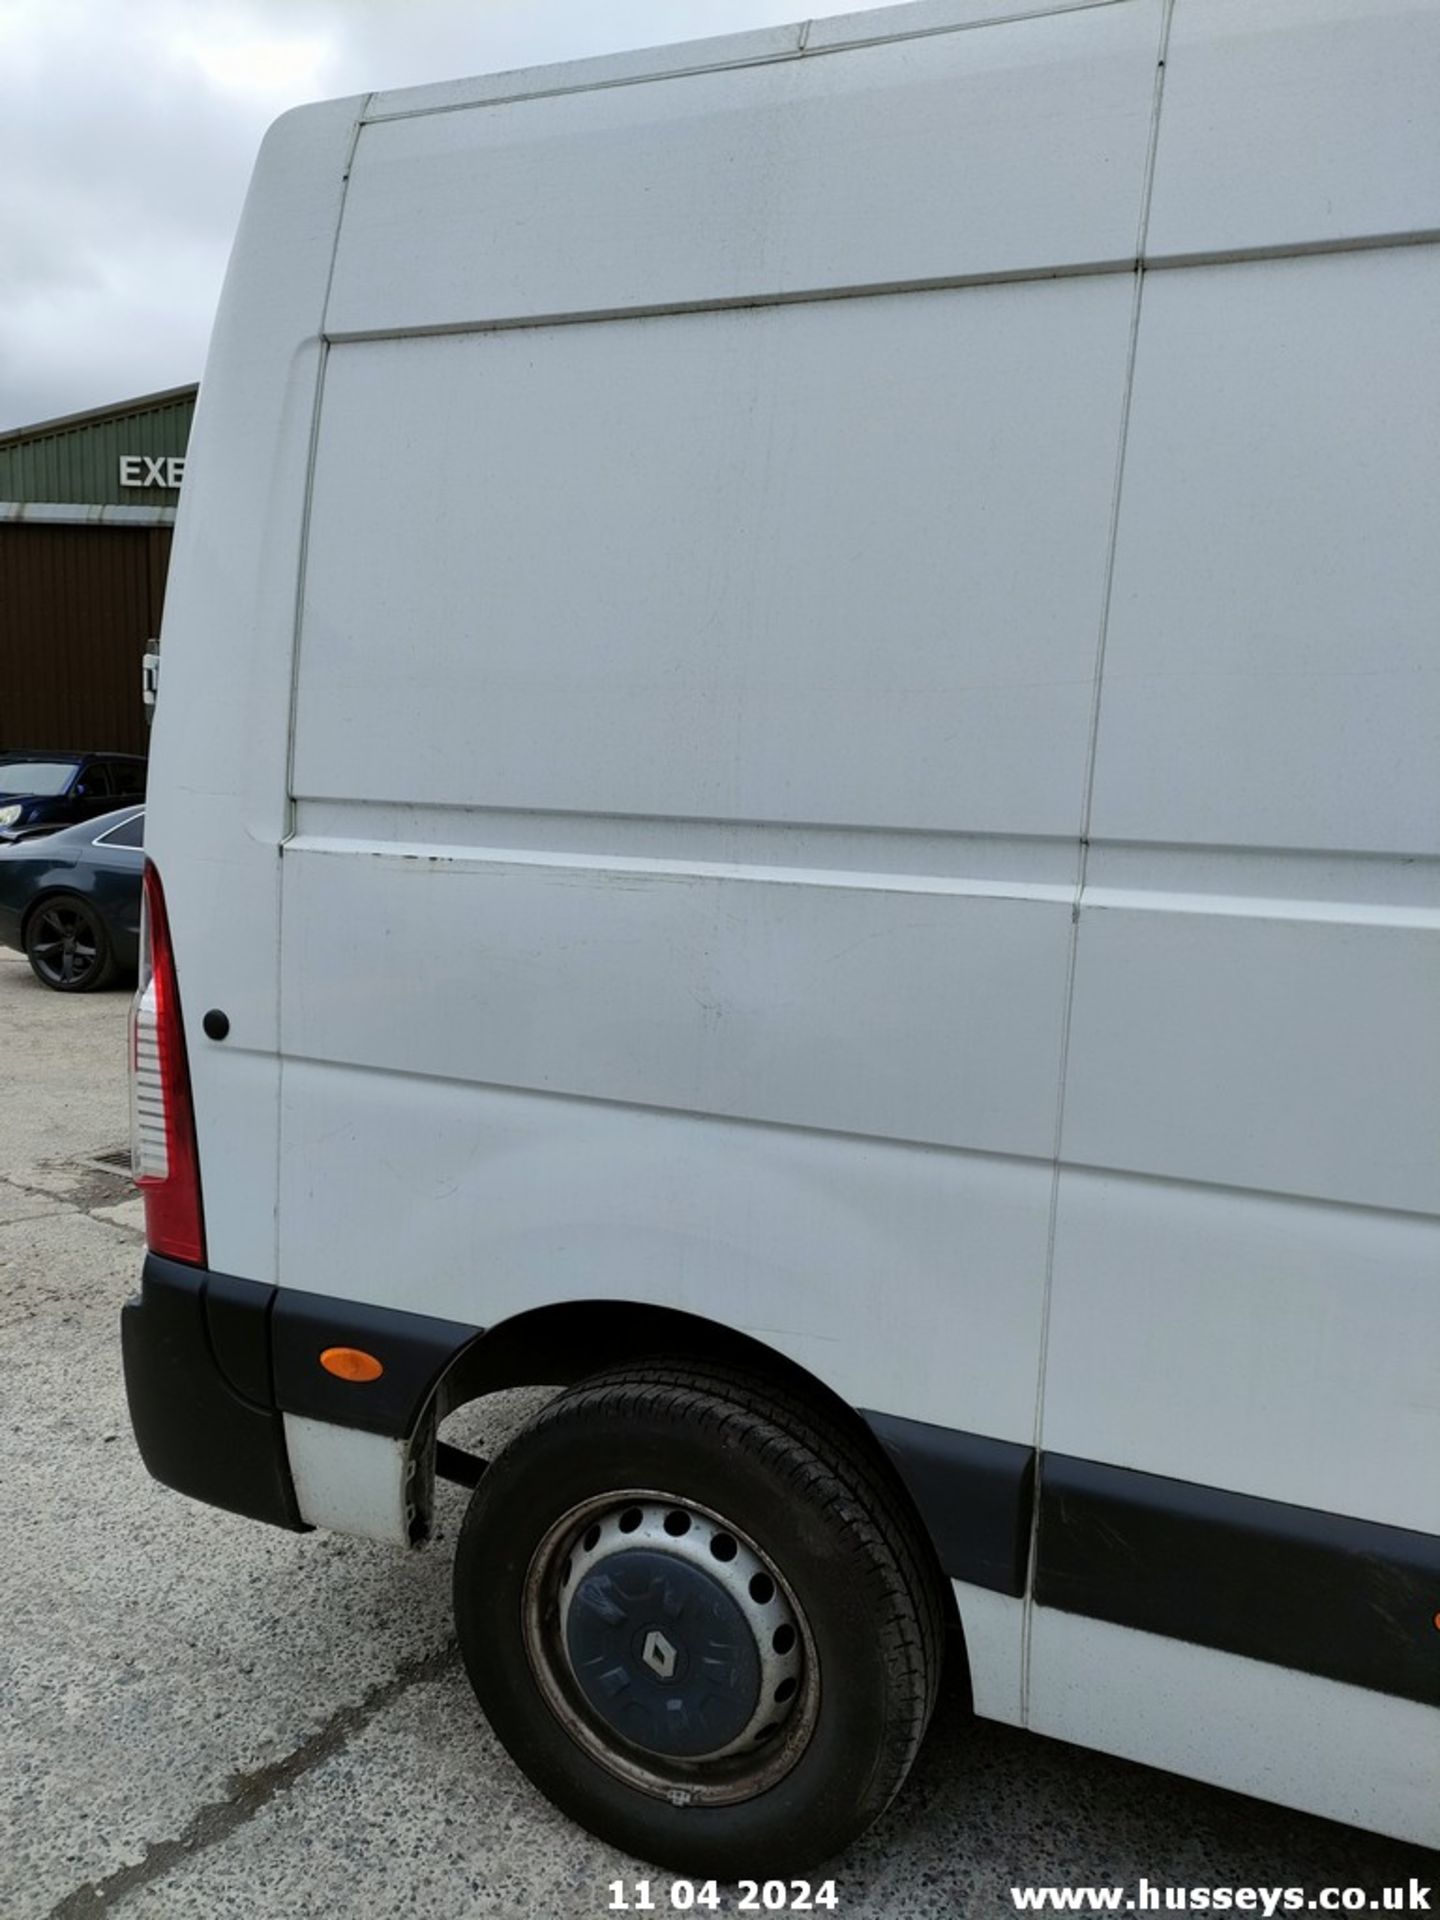 18/68 RENAULT MASTER LM35 BUSINESS DCI - 2298cc 5dr Van (White) - Image 53 of 68